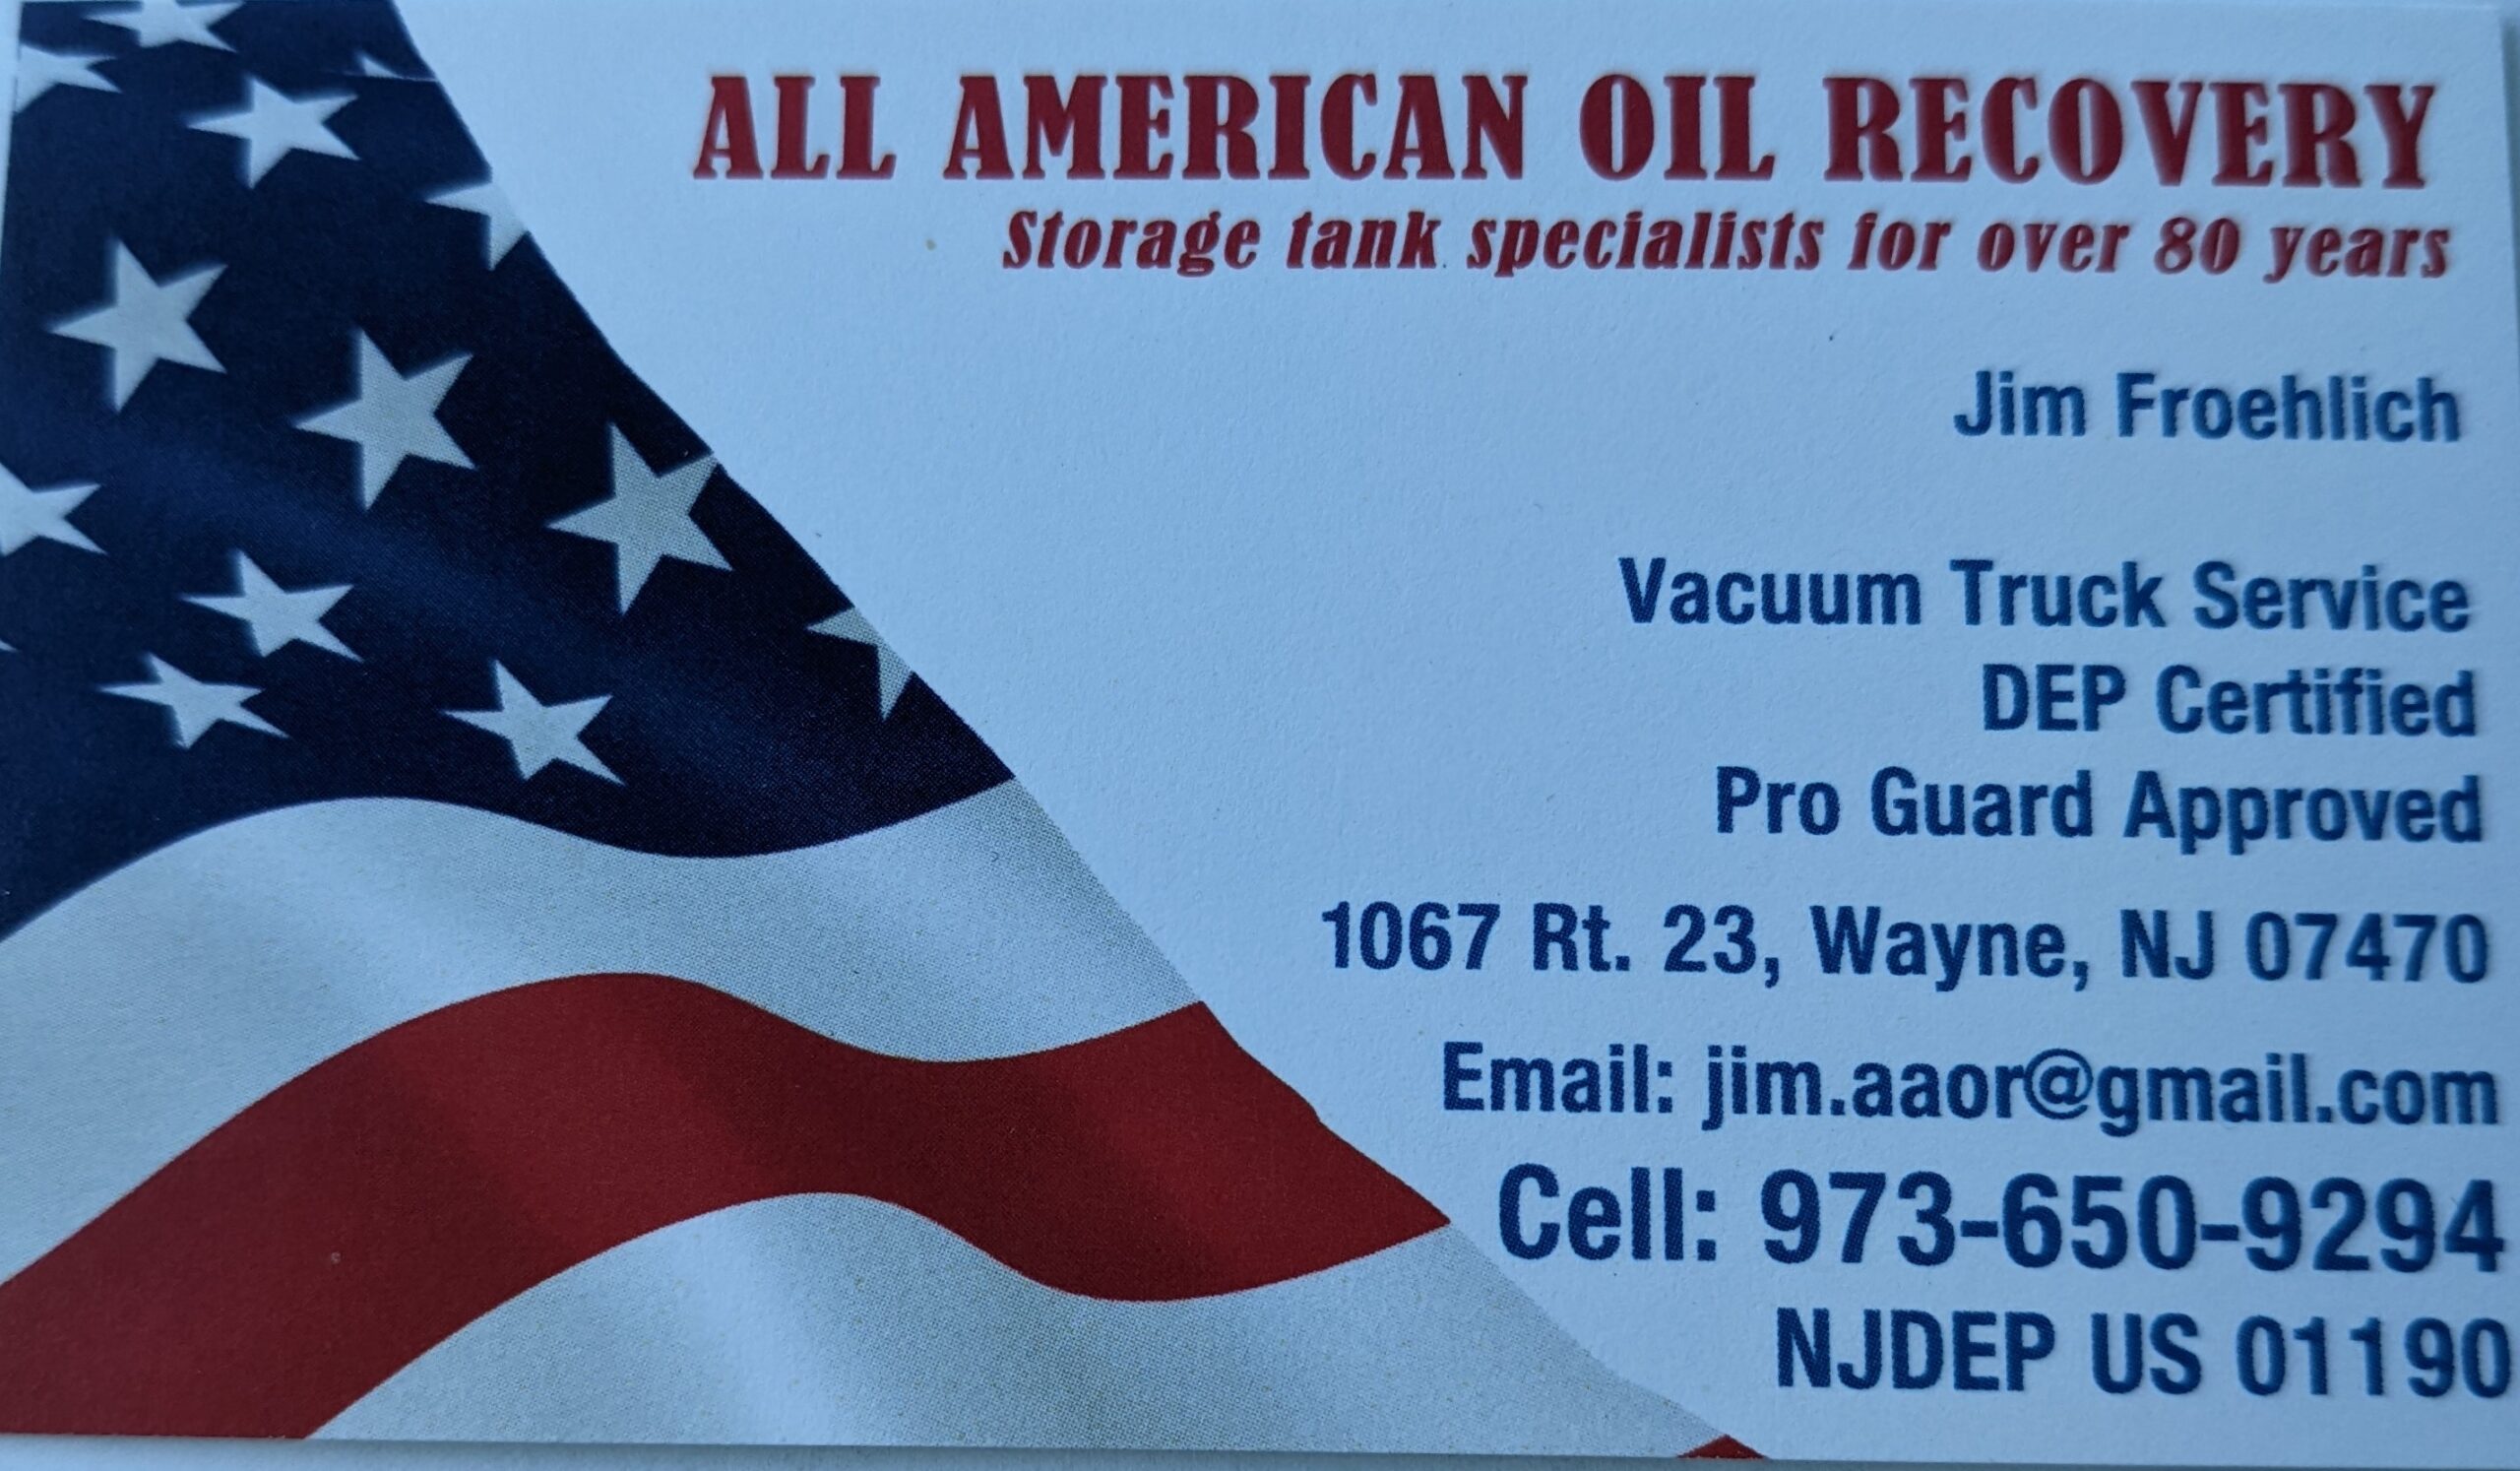 All American Oil Recovery